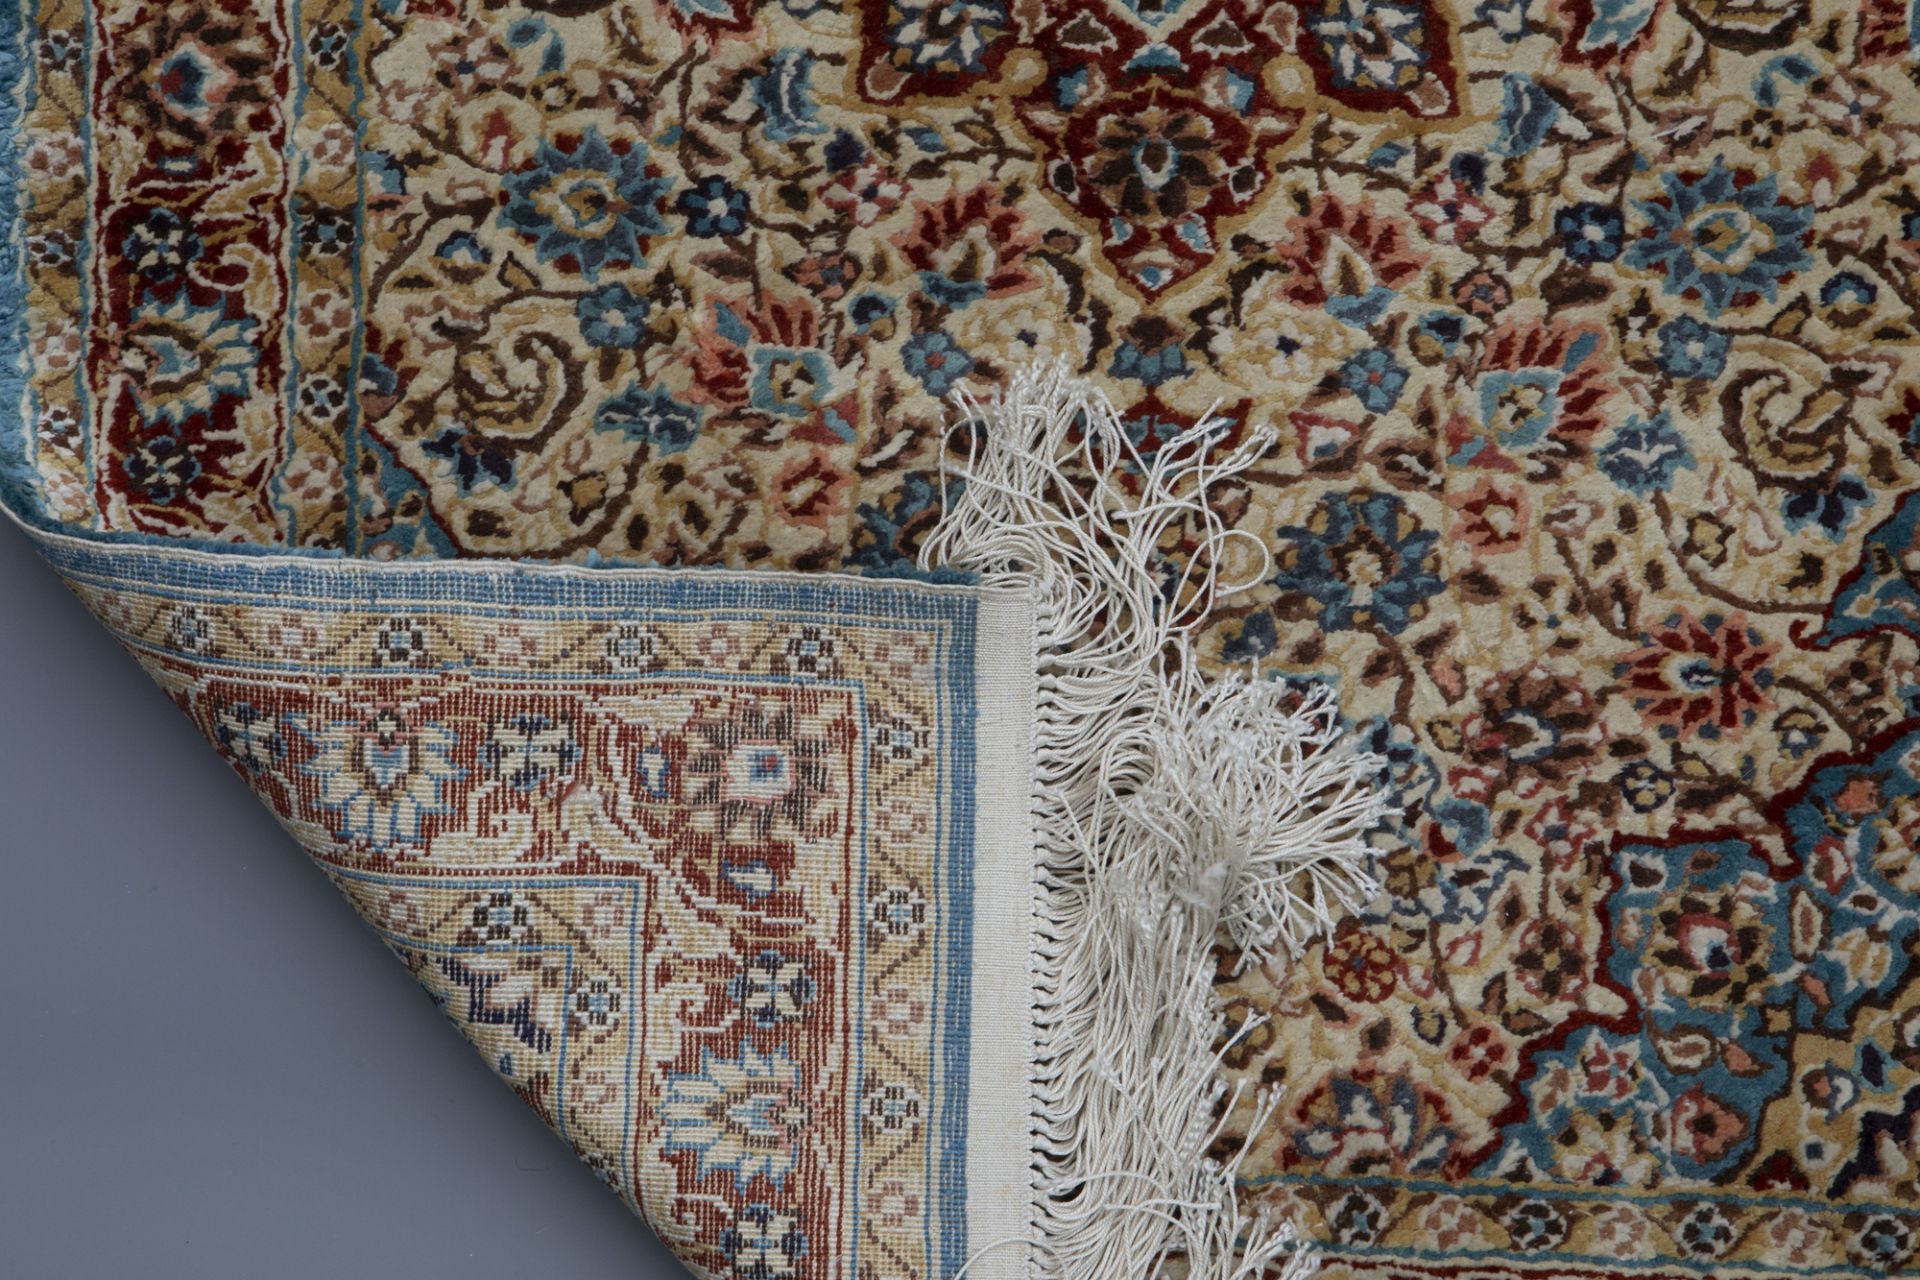 Three Oriental rugs with floral design and a central medallion, silk on cotton, 20th C. - Image 3 of 5